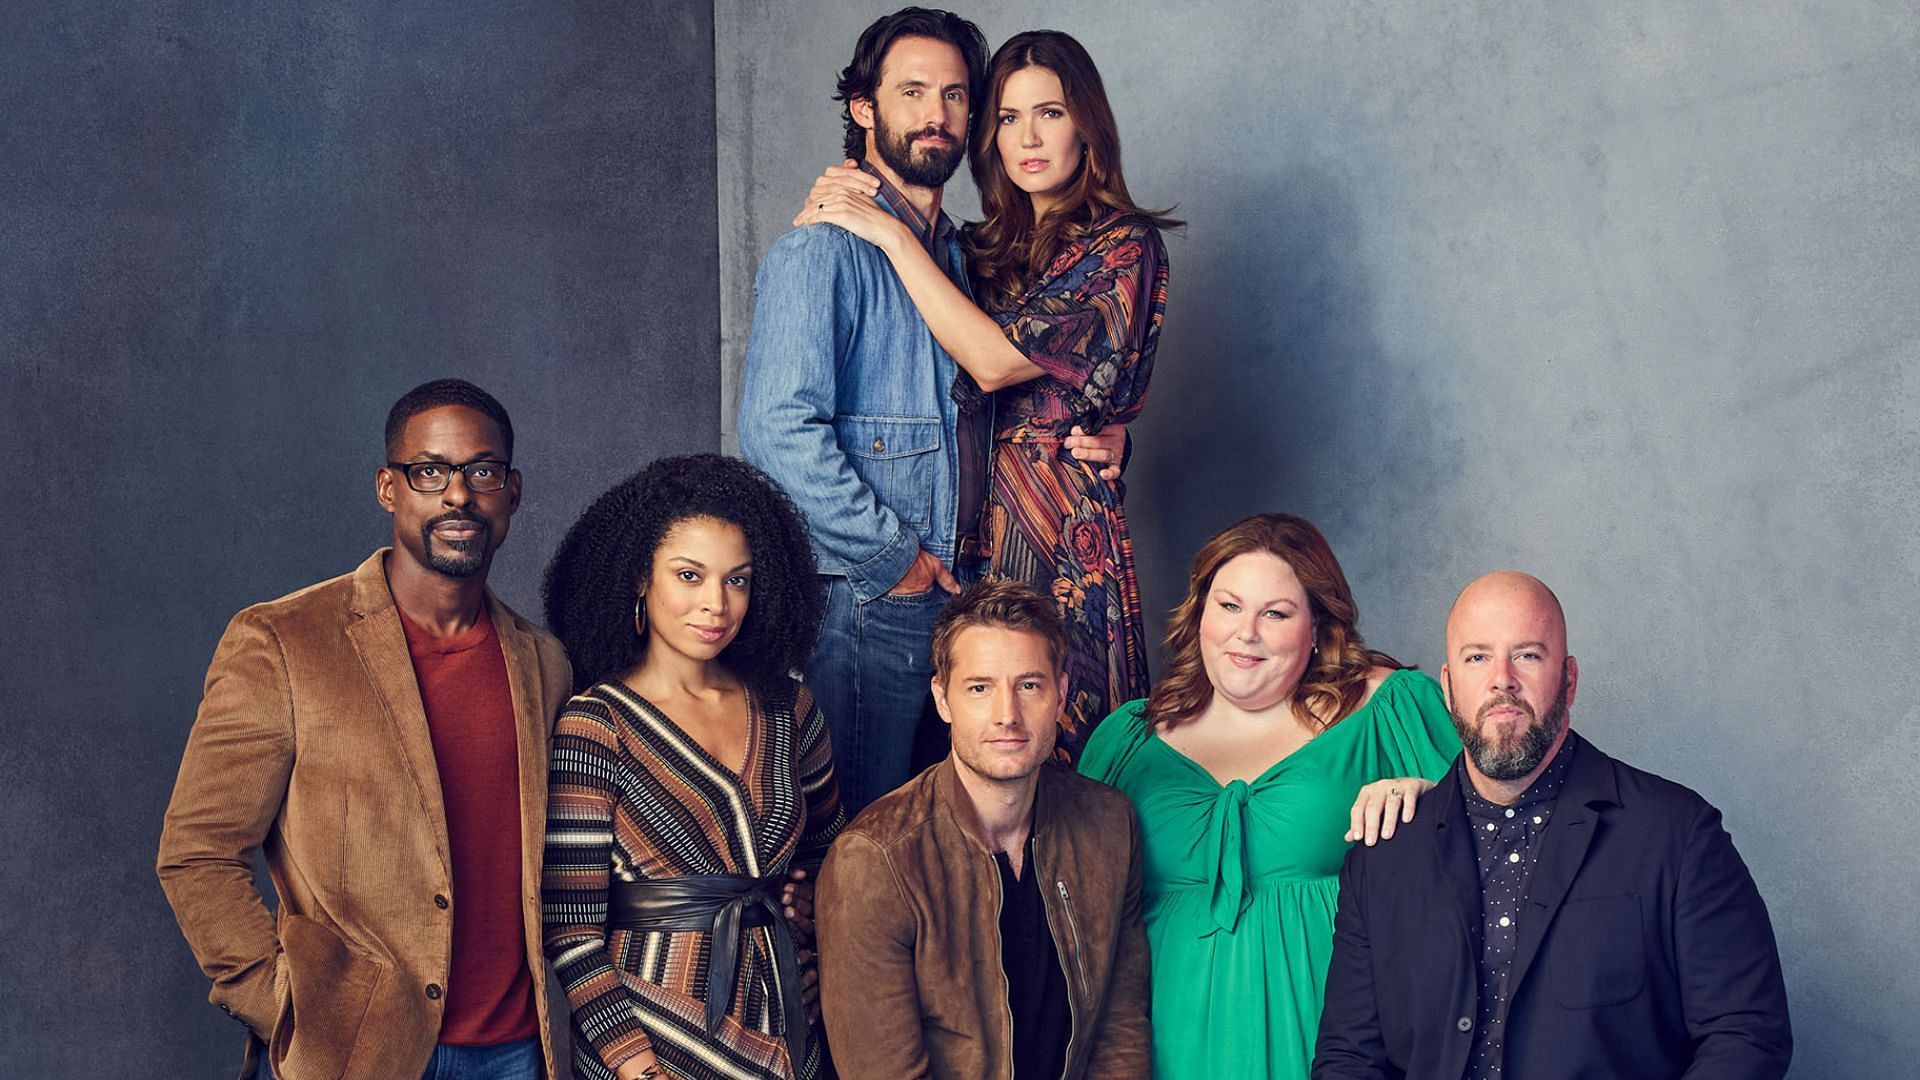 The cast of This Is Us will be appearing for one last time together in the finale (Image via CNN)